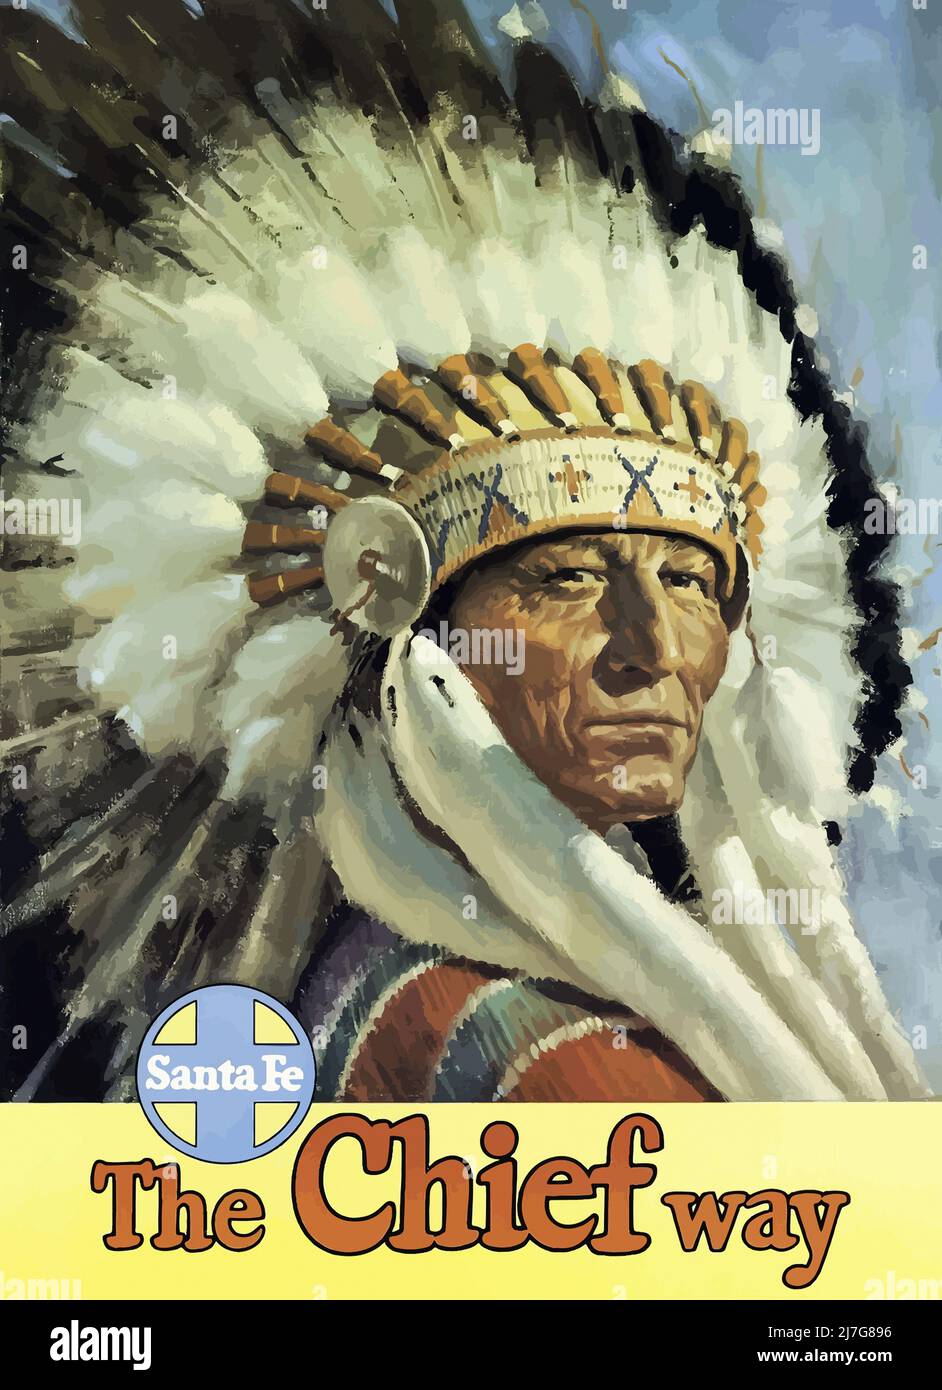 Vintage 1940s Railway Travel Poster - The Chief Way’ 1947 Sante Fe Railroad Travel Poster Native American wearing headdress. Stock Photo